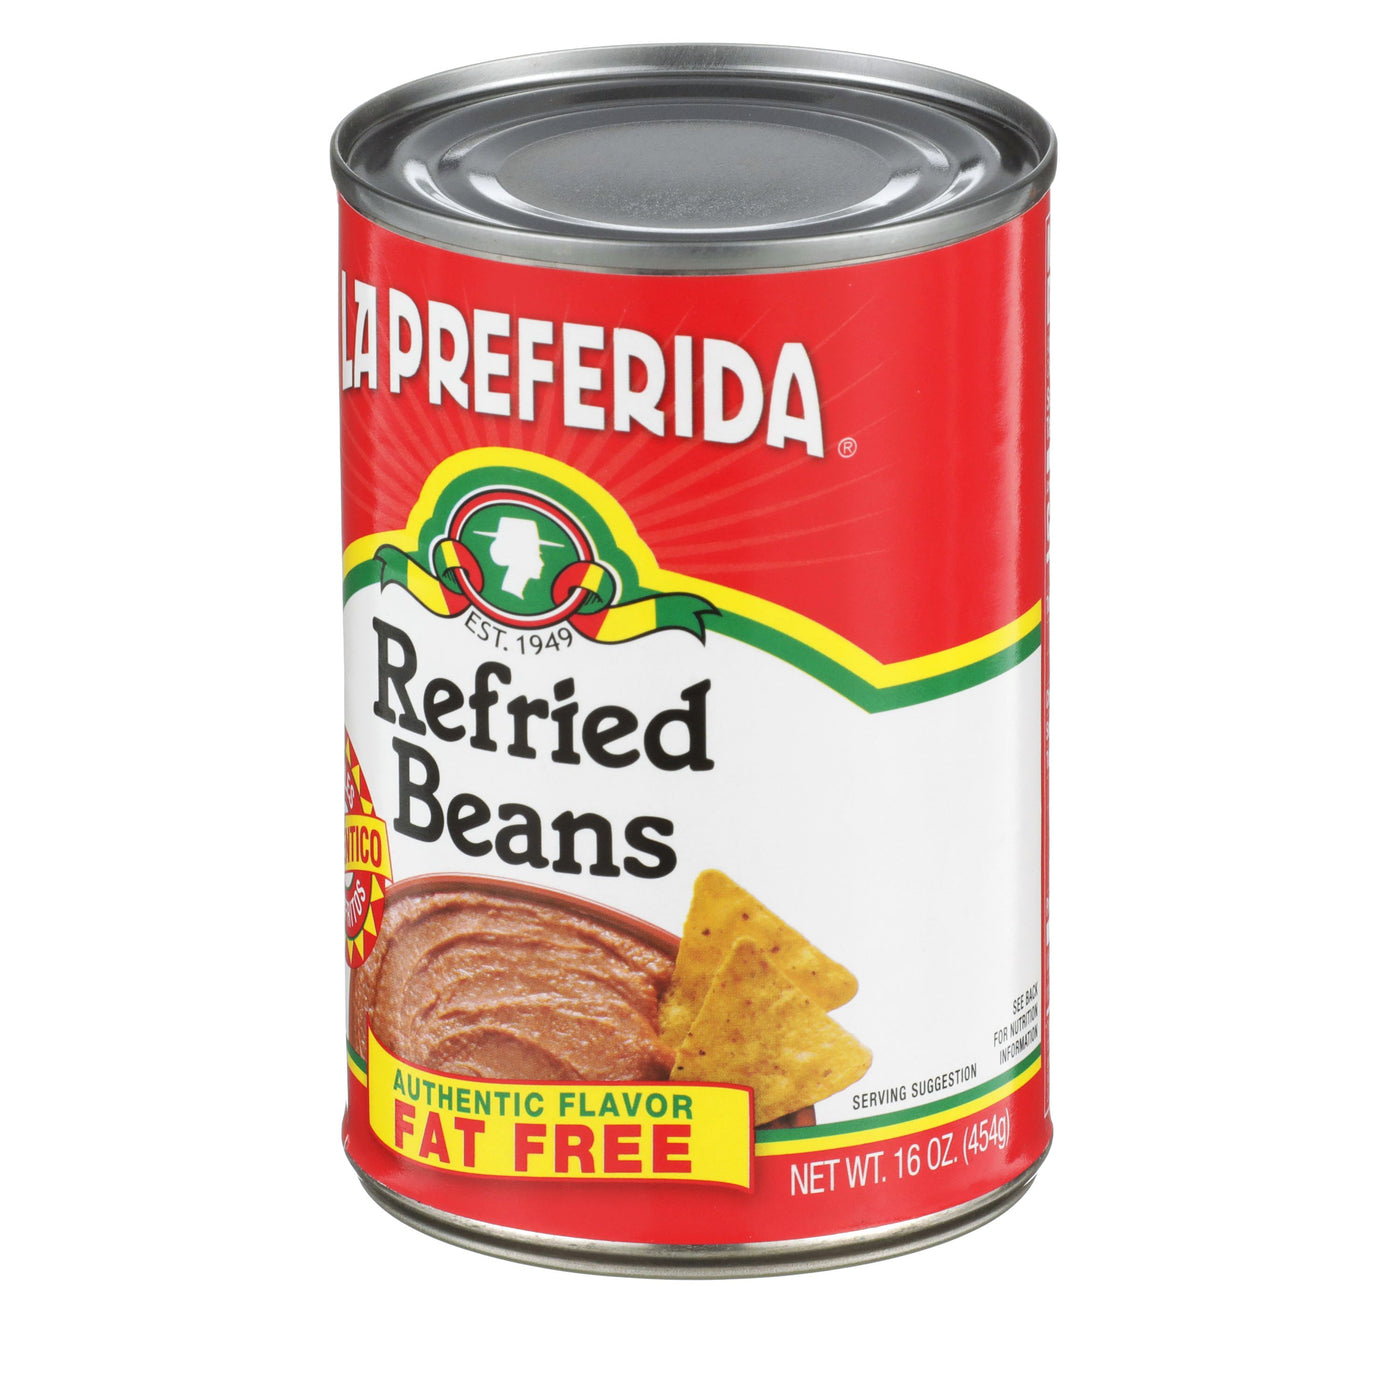 Fat Free Refried Pinto Beans